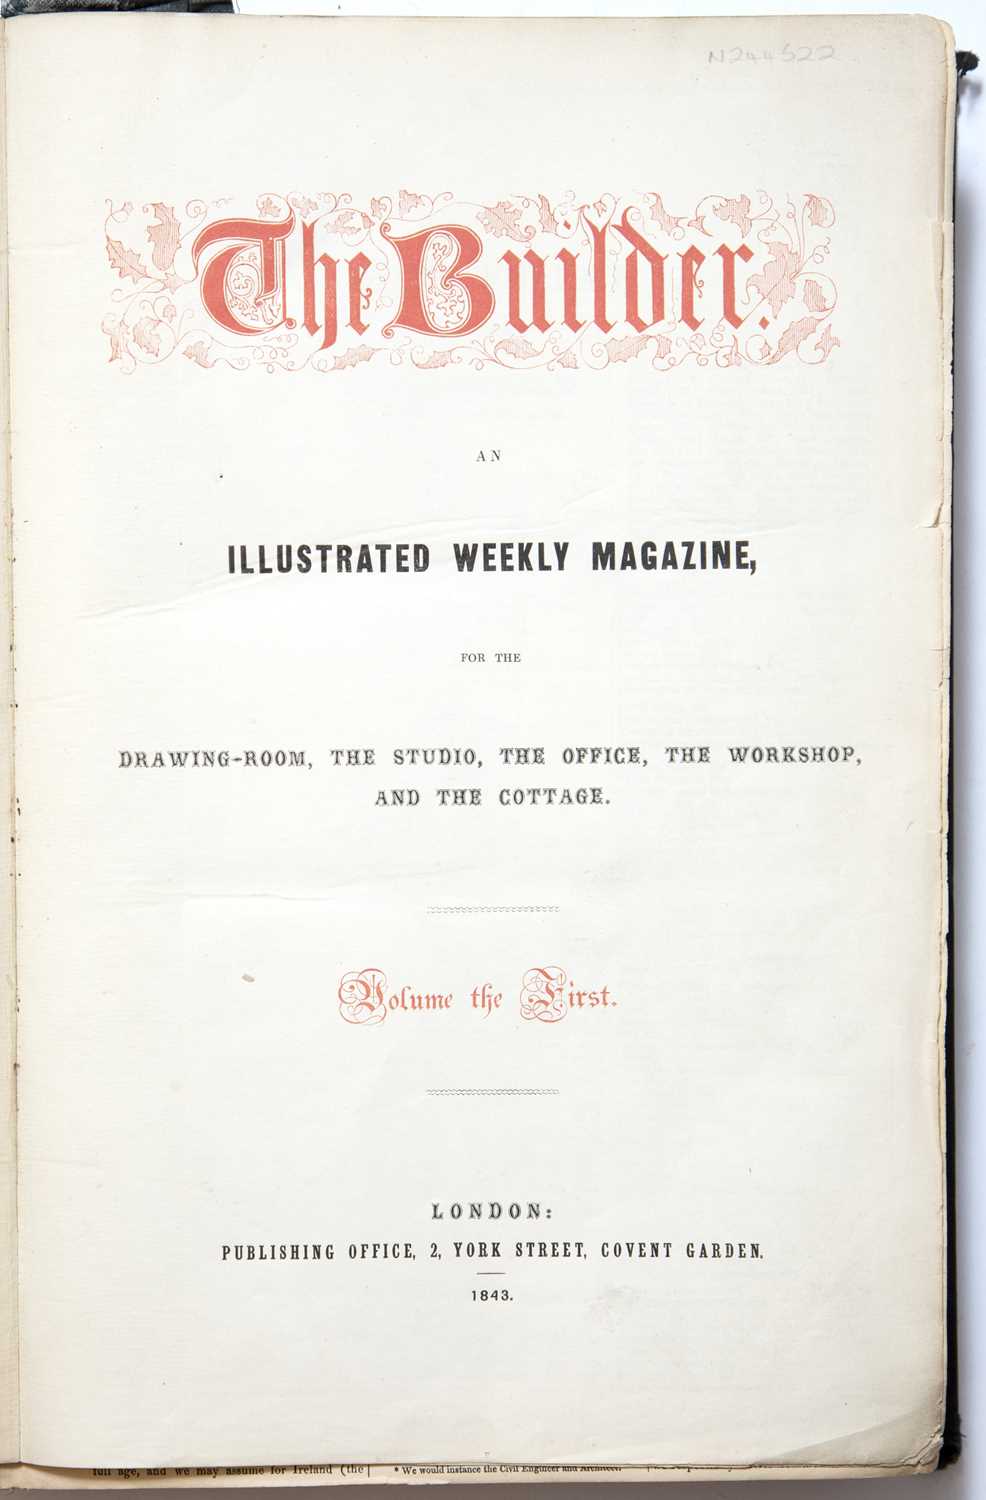 'The Builder'. An Illustrated Weekly Magazine for the Drawing-Room The Studio, The Office, The - Image 2 of 3